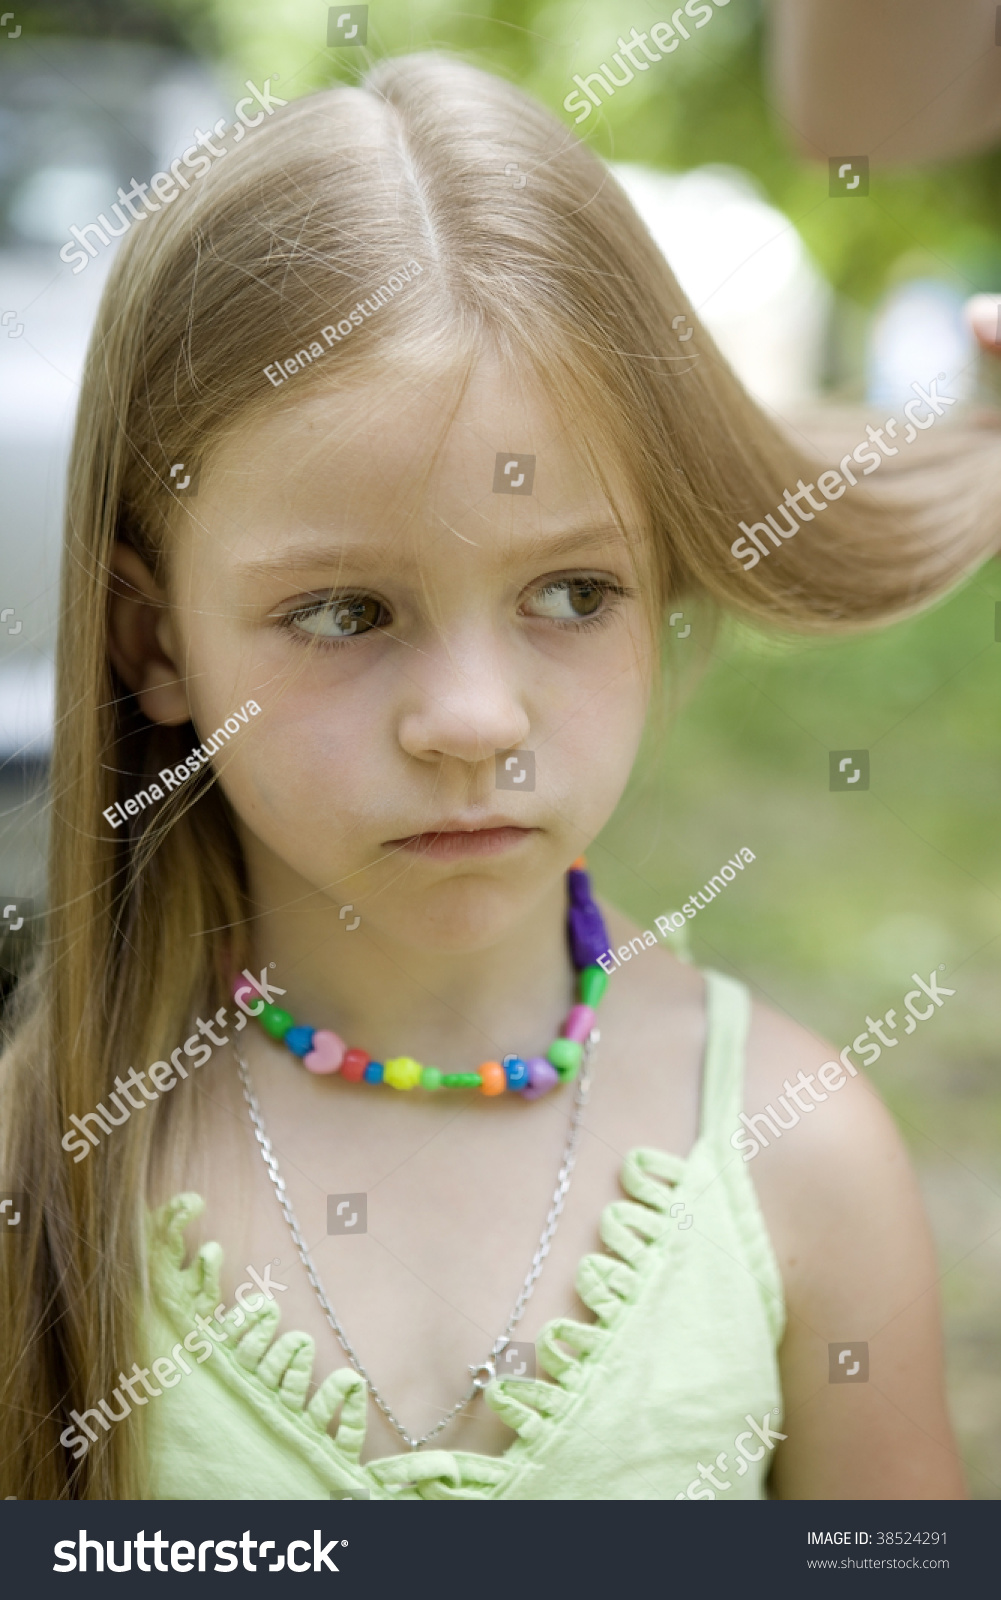 Portrait Of A Cute 6 Years Old Girl. Stock Photo 38524291 : Shutterstock